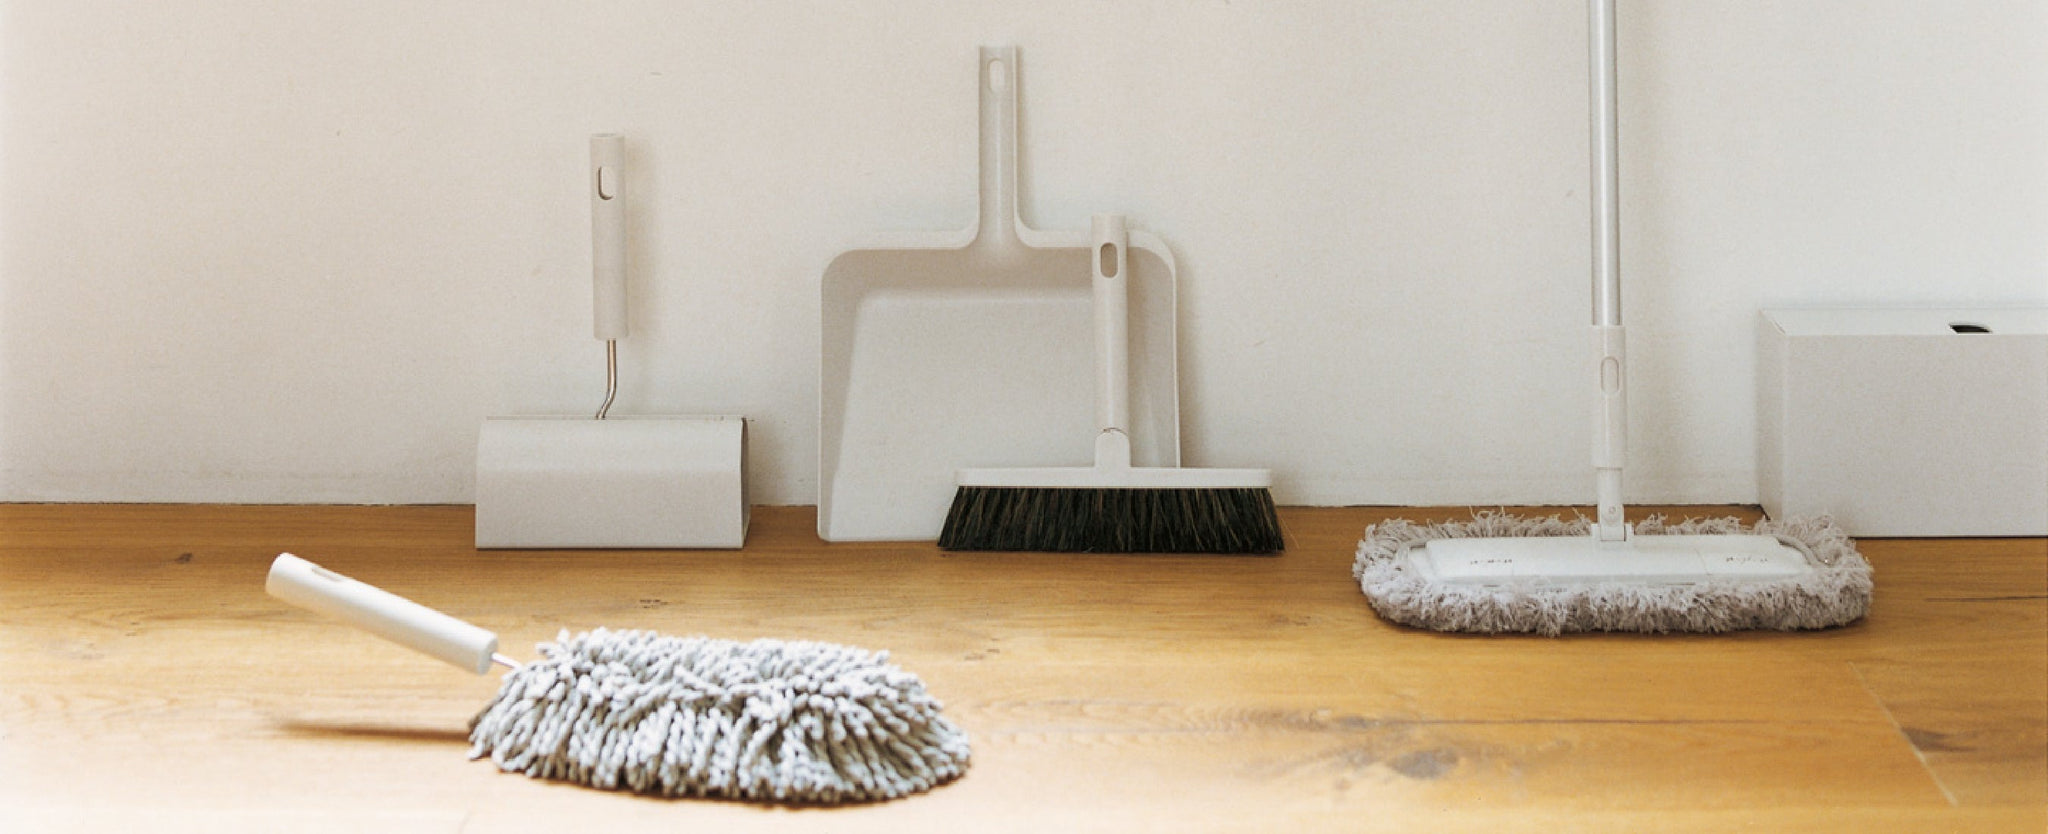 Dustpan, Broom, Mop against a white wall, handheld mop place in front on a wood floor. 